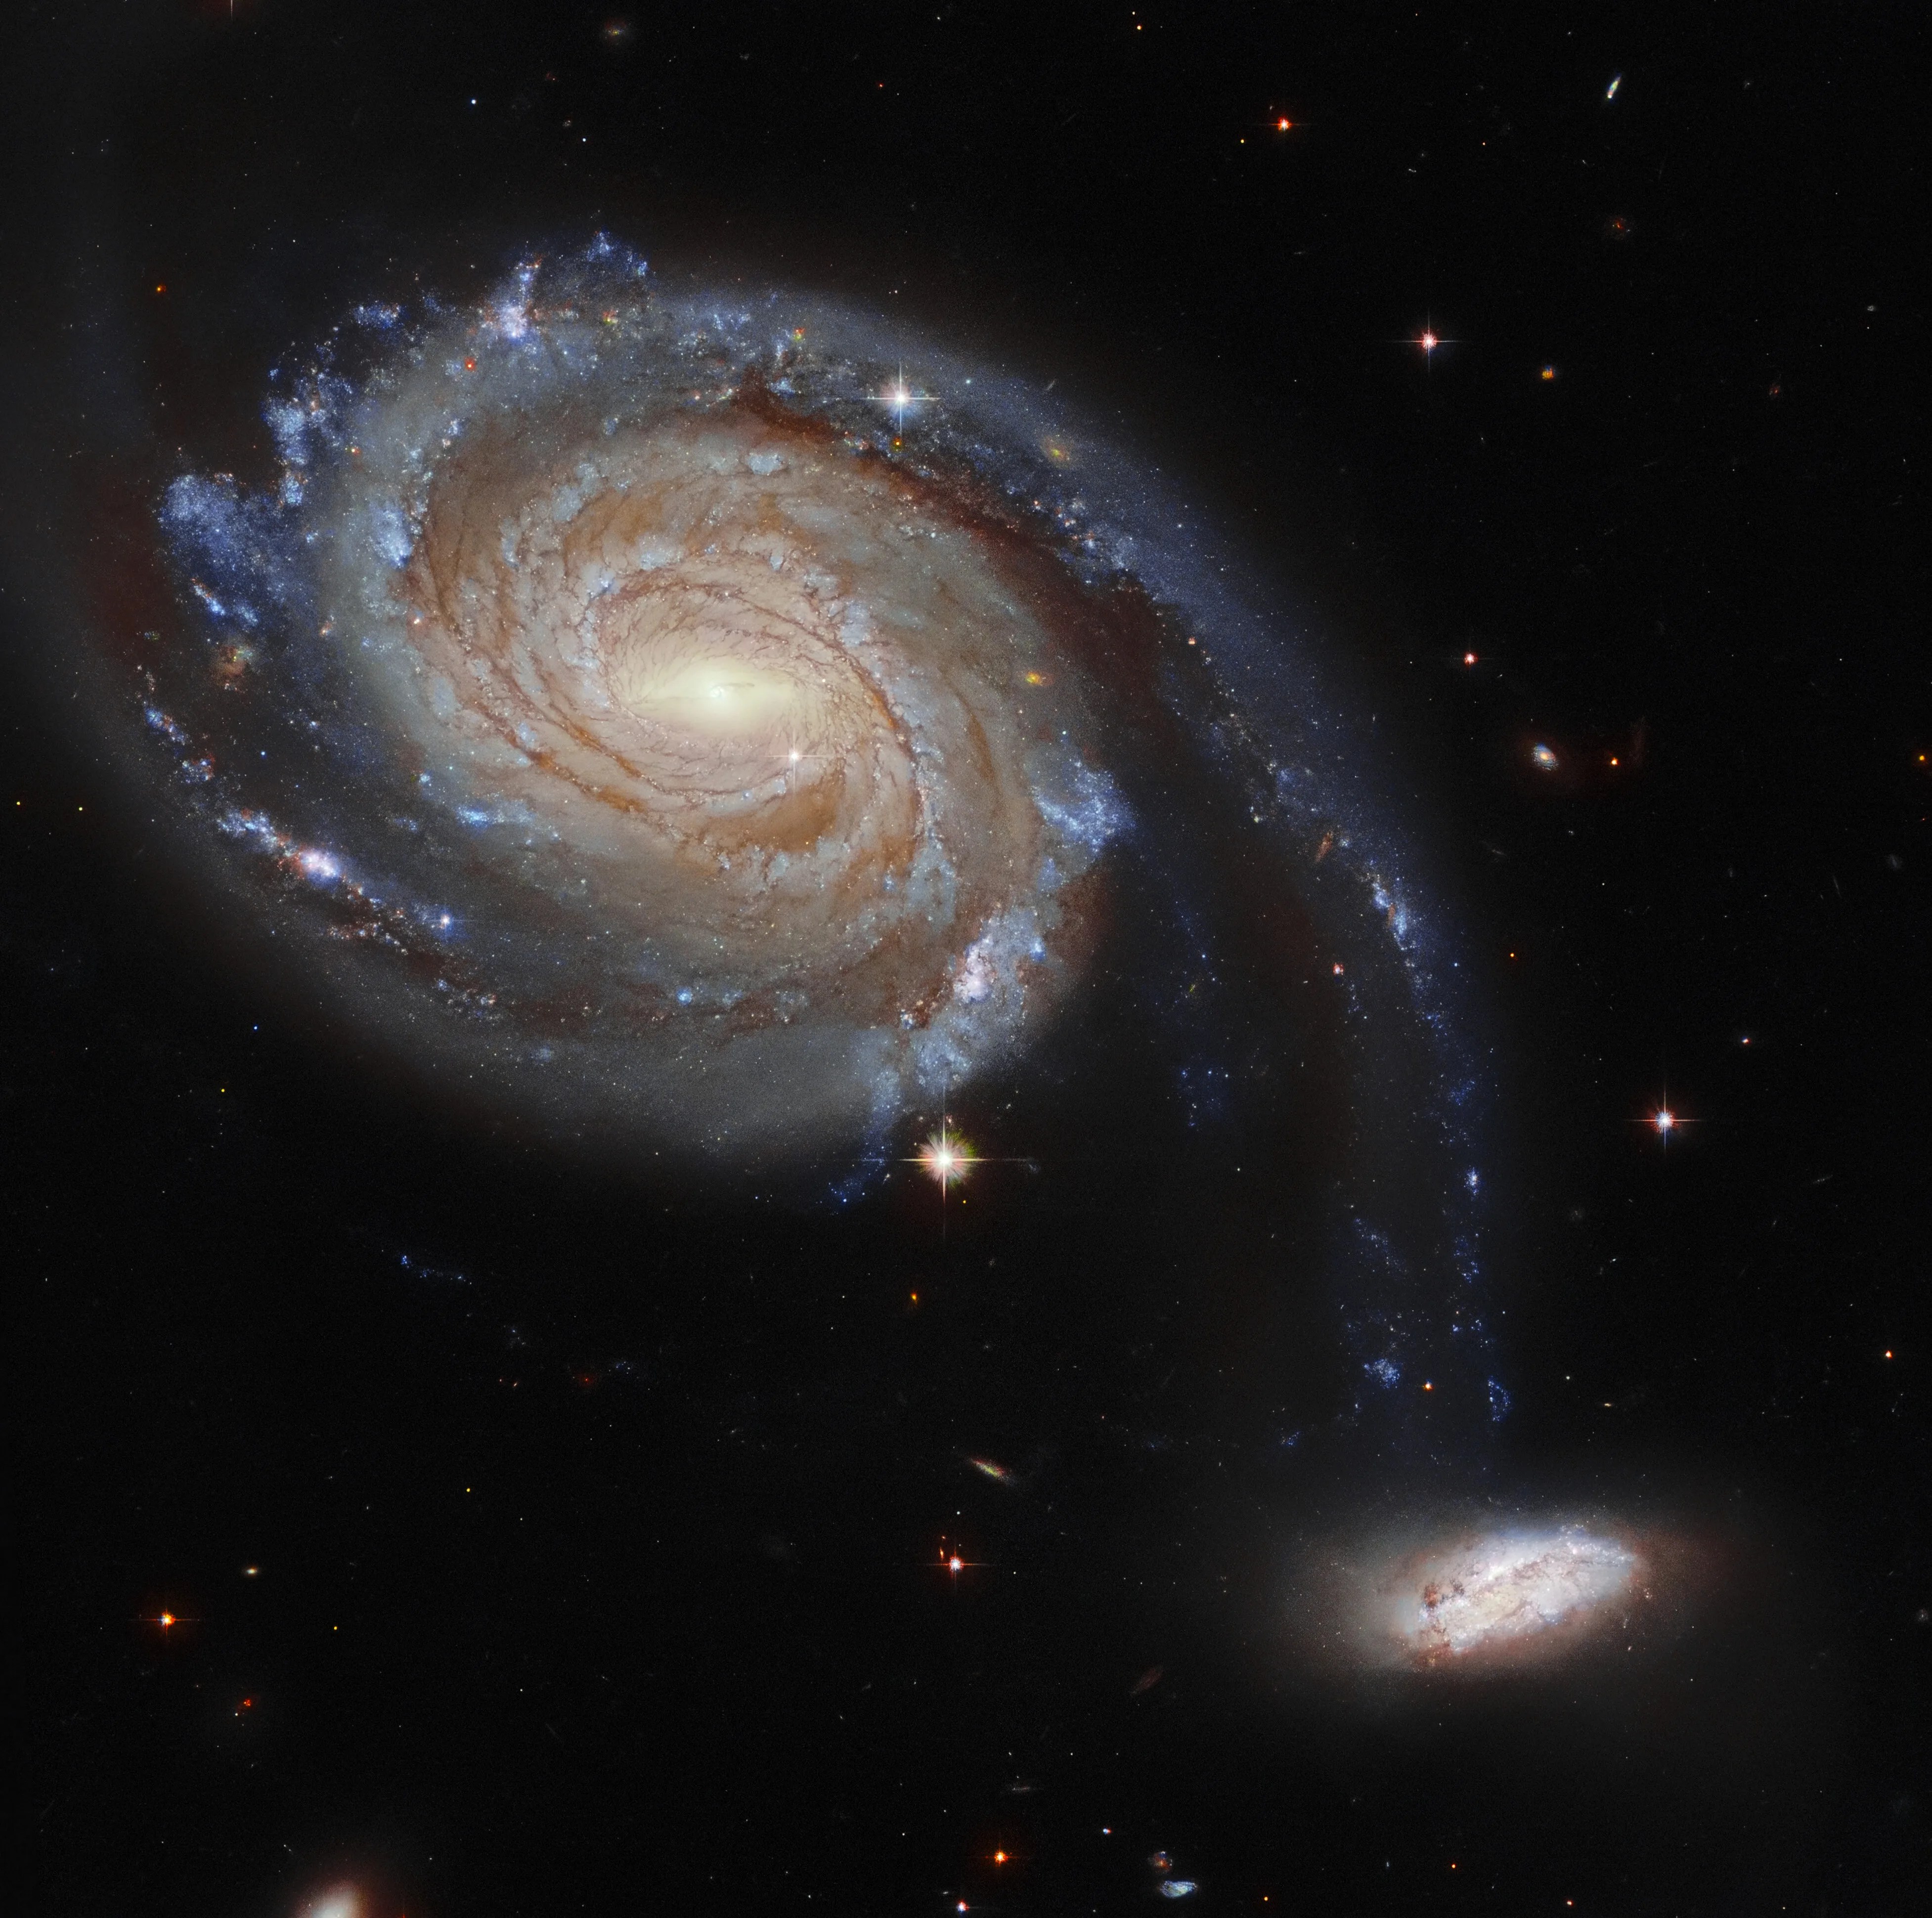 This observation from the nasa/esa hubble space telescope showcases arp 86, a peculiar pair of interacting galaxies which lies roughly 220 million light-years from earth in the constellation pegasus.